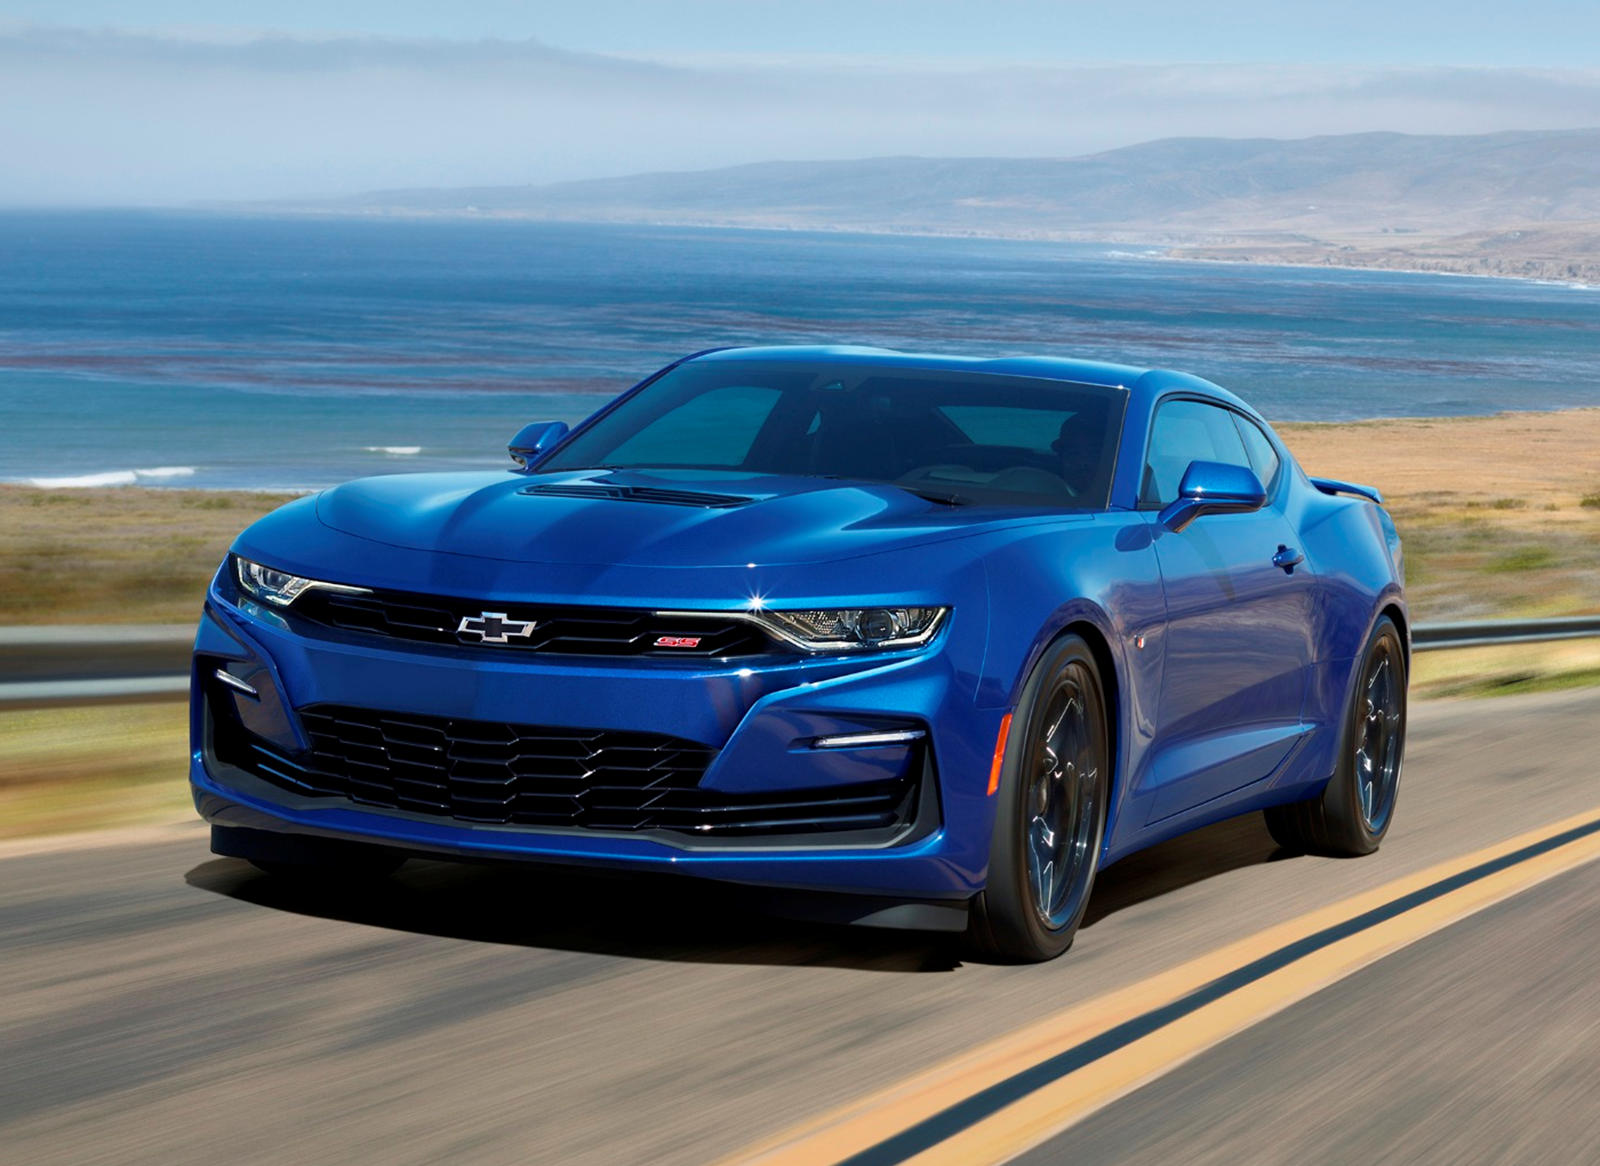 New Chevy Camaro And Corvette Sales Banned In Europe CarBuzz